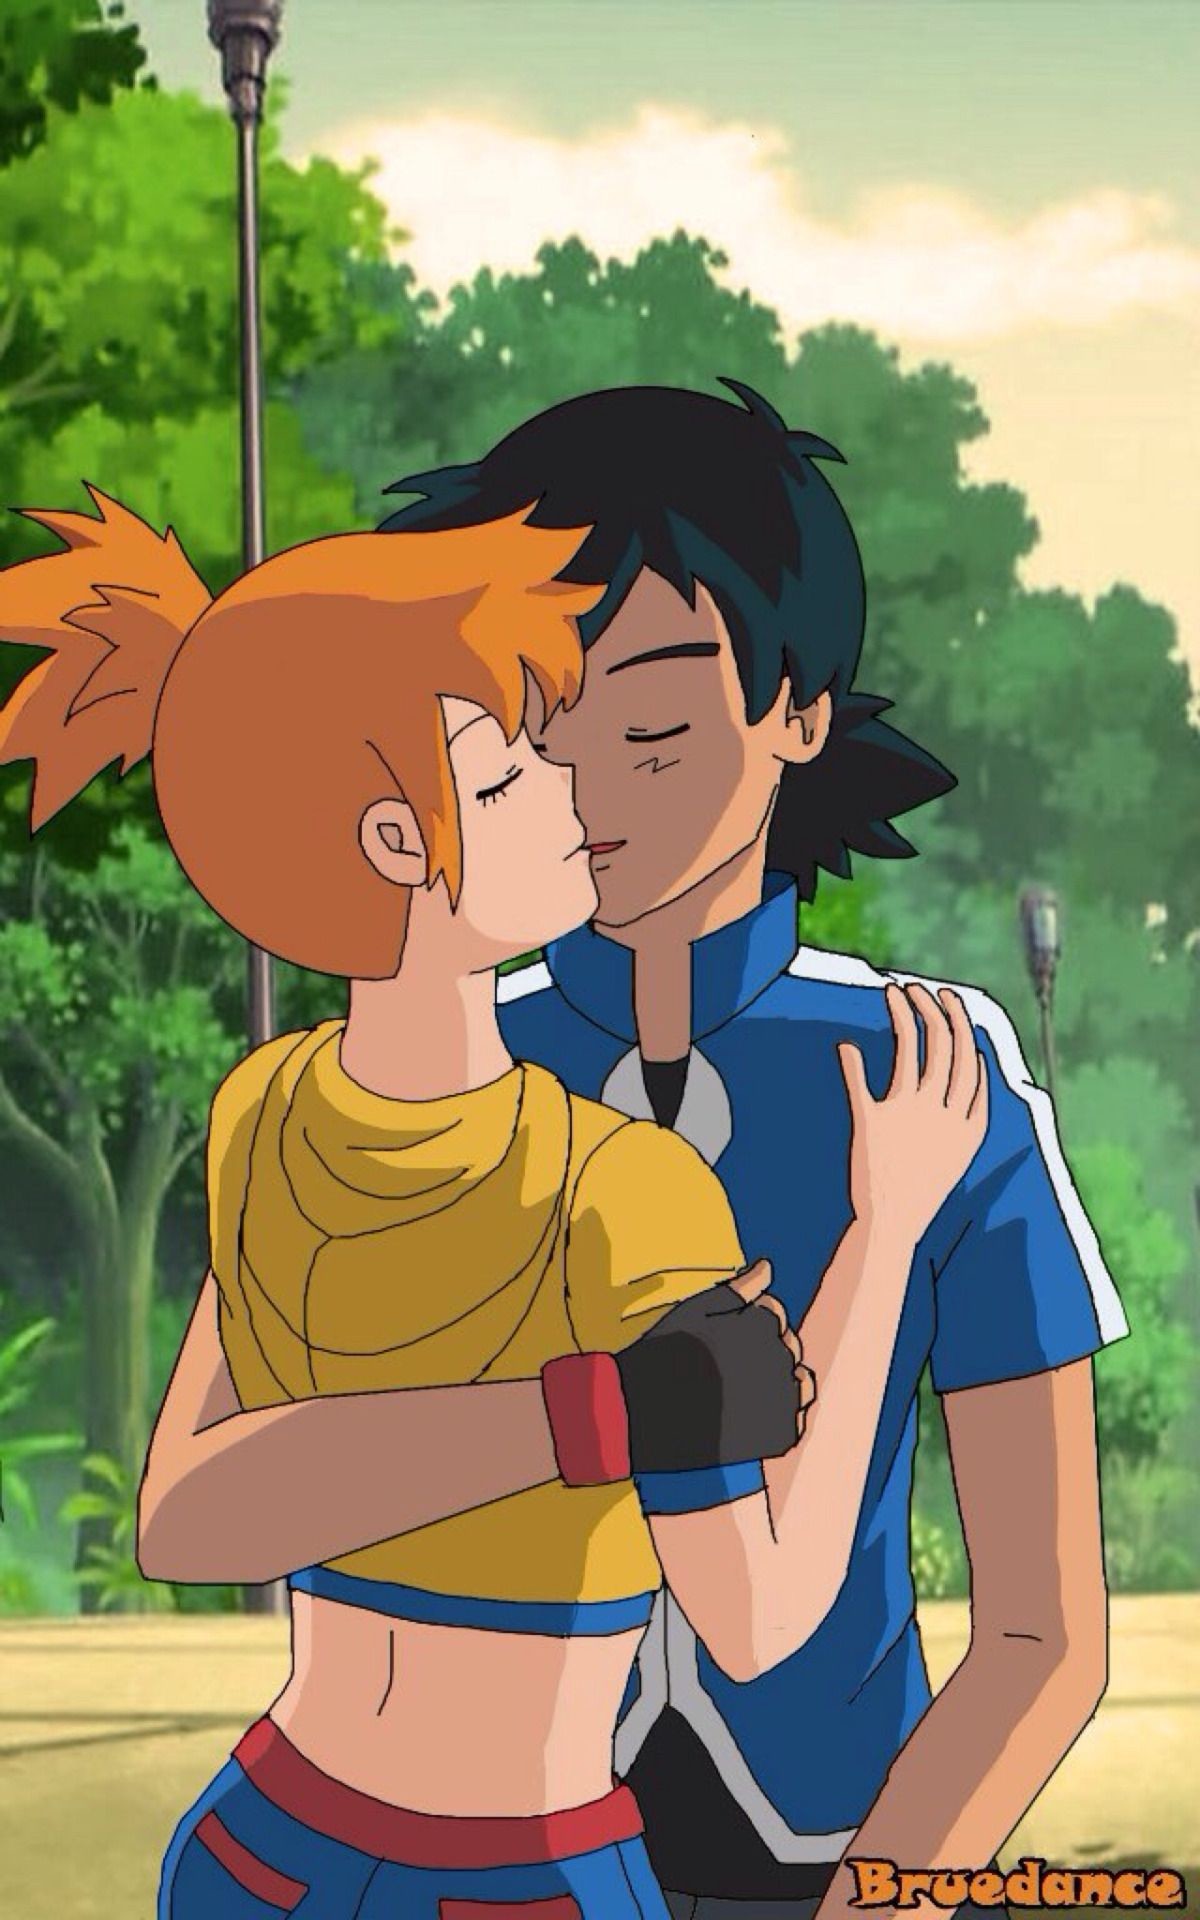 1200x1920 Ash and Misty's kiss